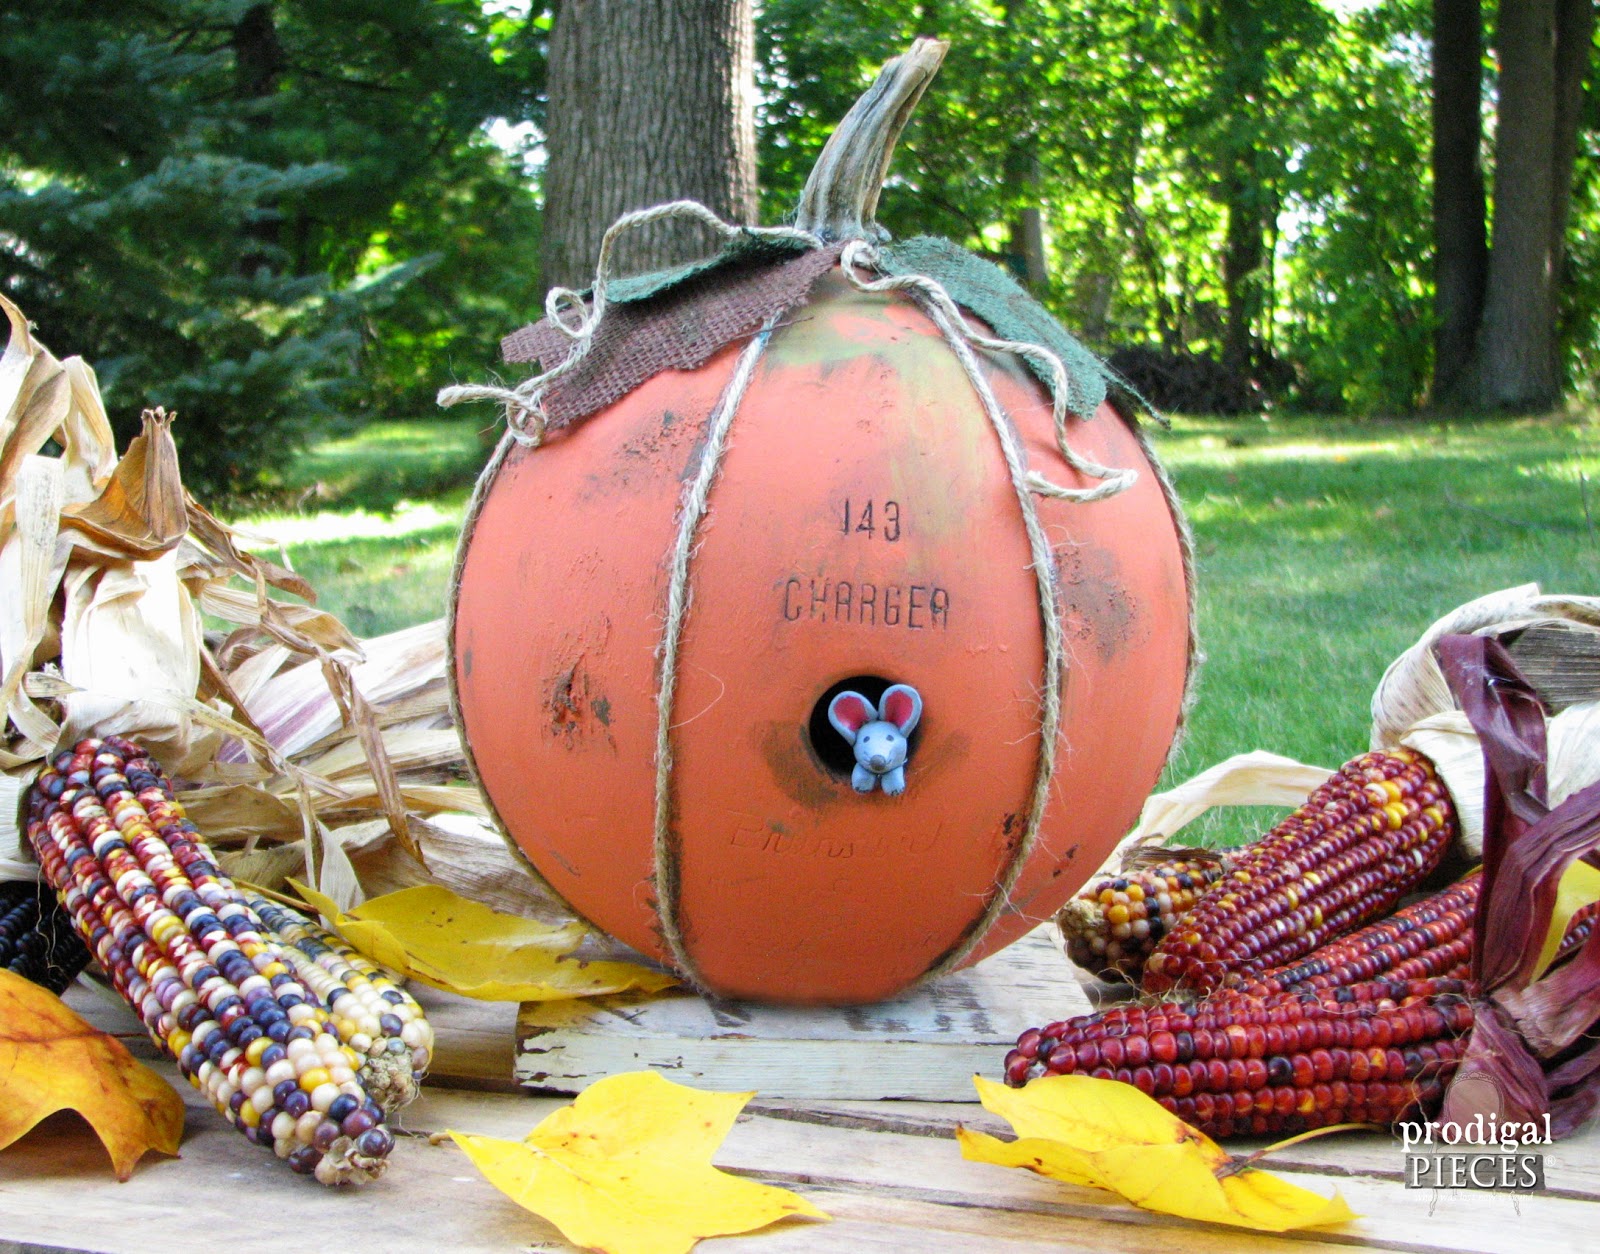 Repurpose an Old Bowling Ball into a Mouse House Pumpkin for Fall by Prodigal Pieces | www.prodigalpieces.com